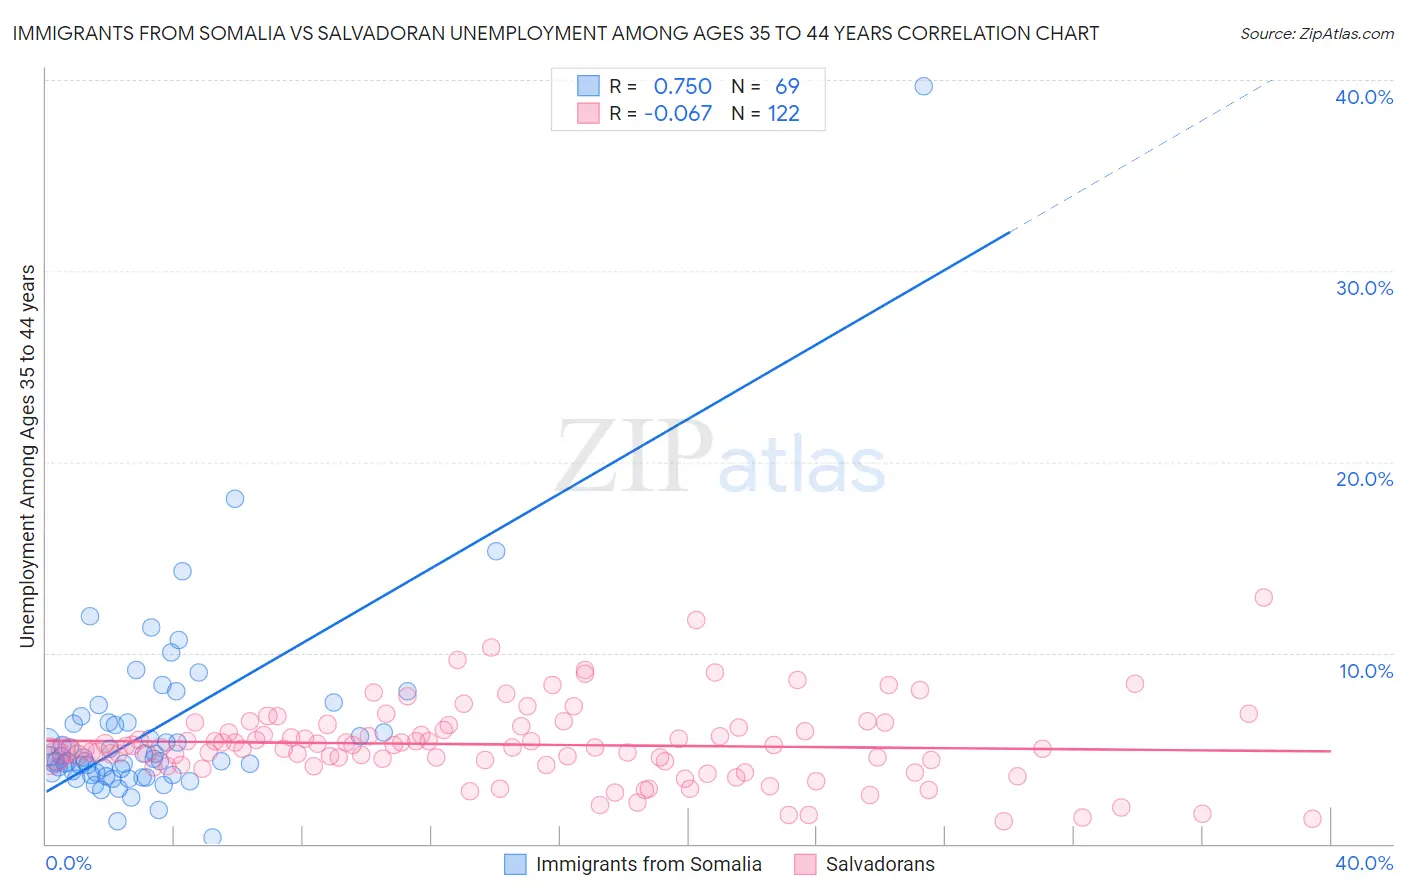 Immigrants from Somalia vs Salvadoran Unemployment Among Ages 35 to 44 years